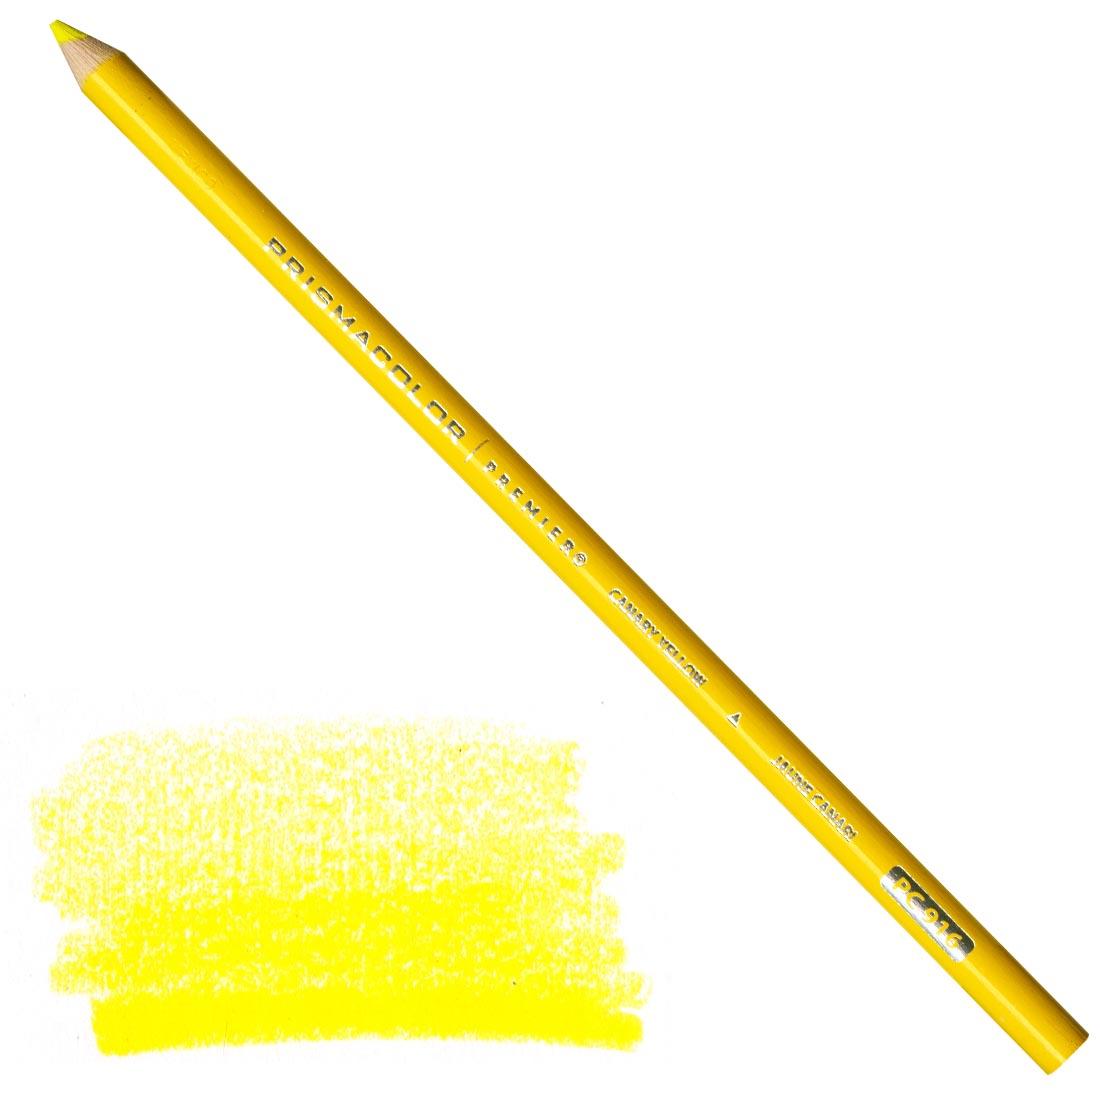 Canary Yellow Prismacolor Premier Colored Pencil with a sample colored swatch